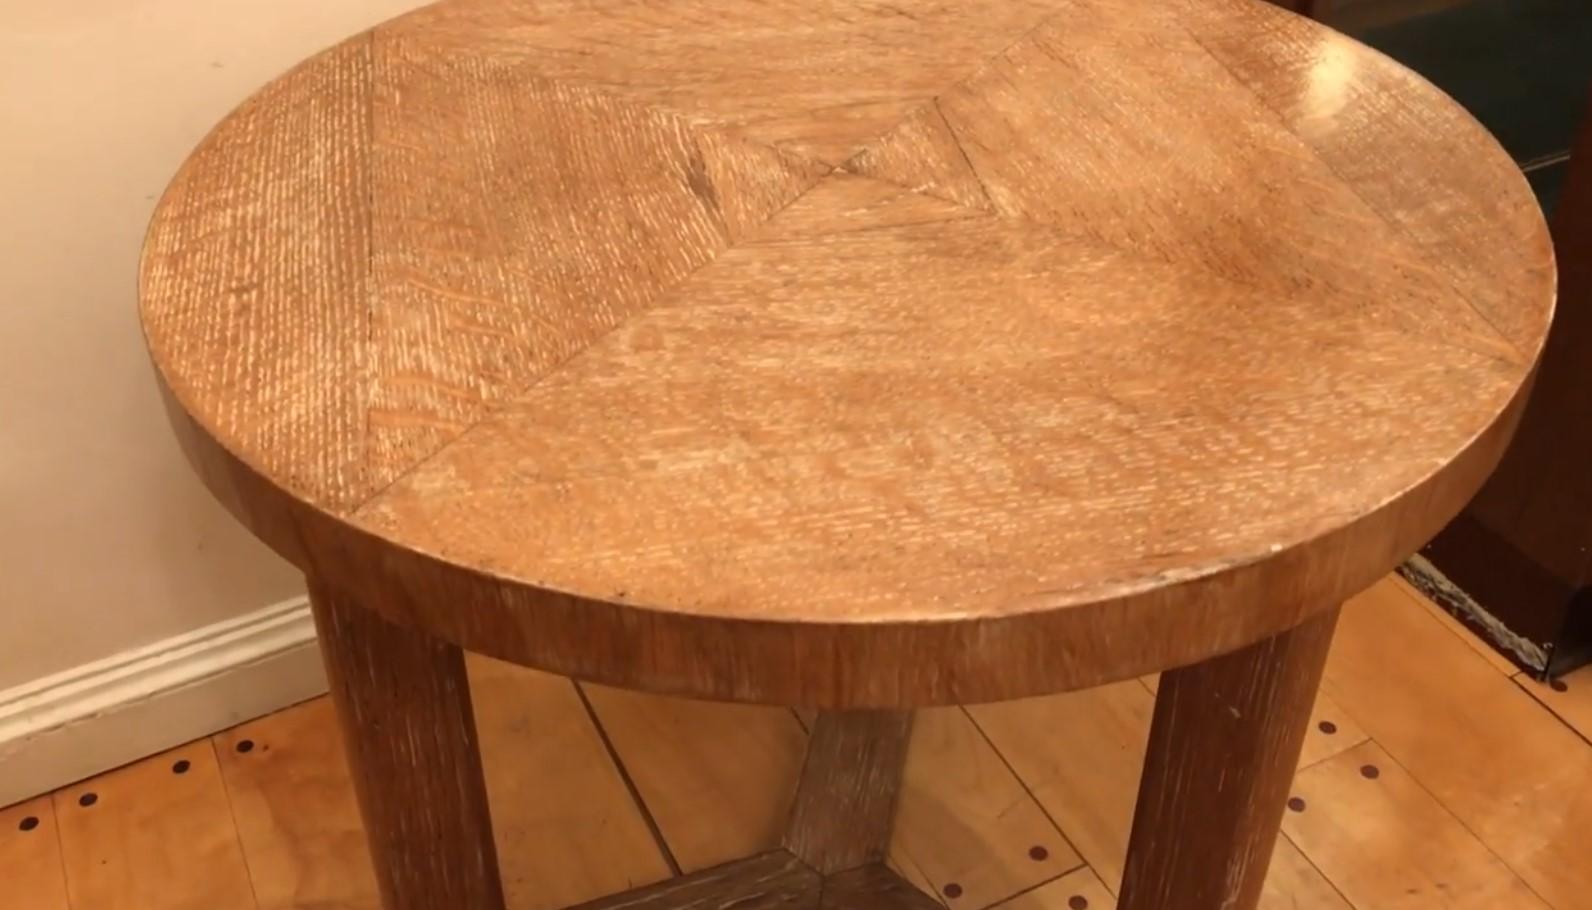 Table.

Material: Wood 
France
We have specialized in the sale of Art Deco and Art Nouveau and Vintage styles since 1982. If you have any questions we are at your disposal.
Pushing the button that reads 'View All From Seller'. And you can see more